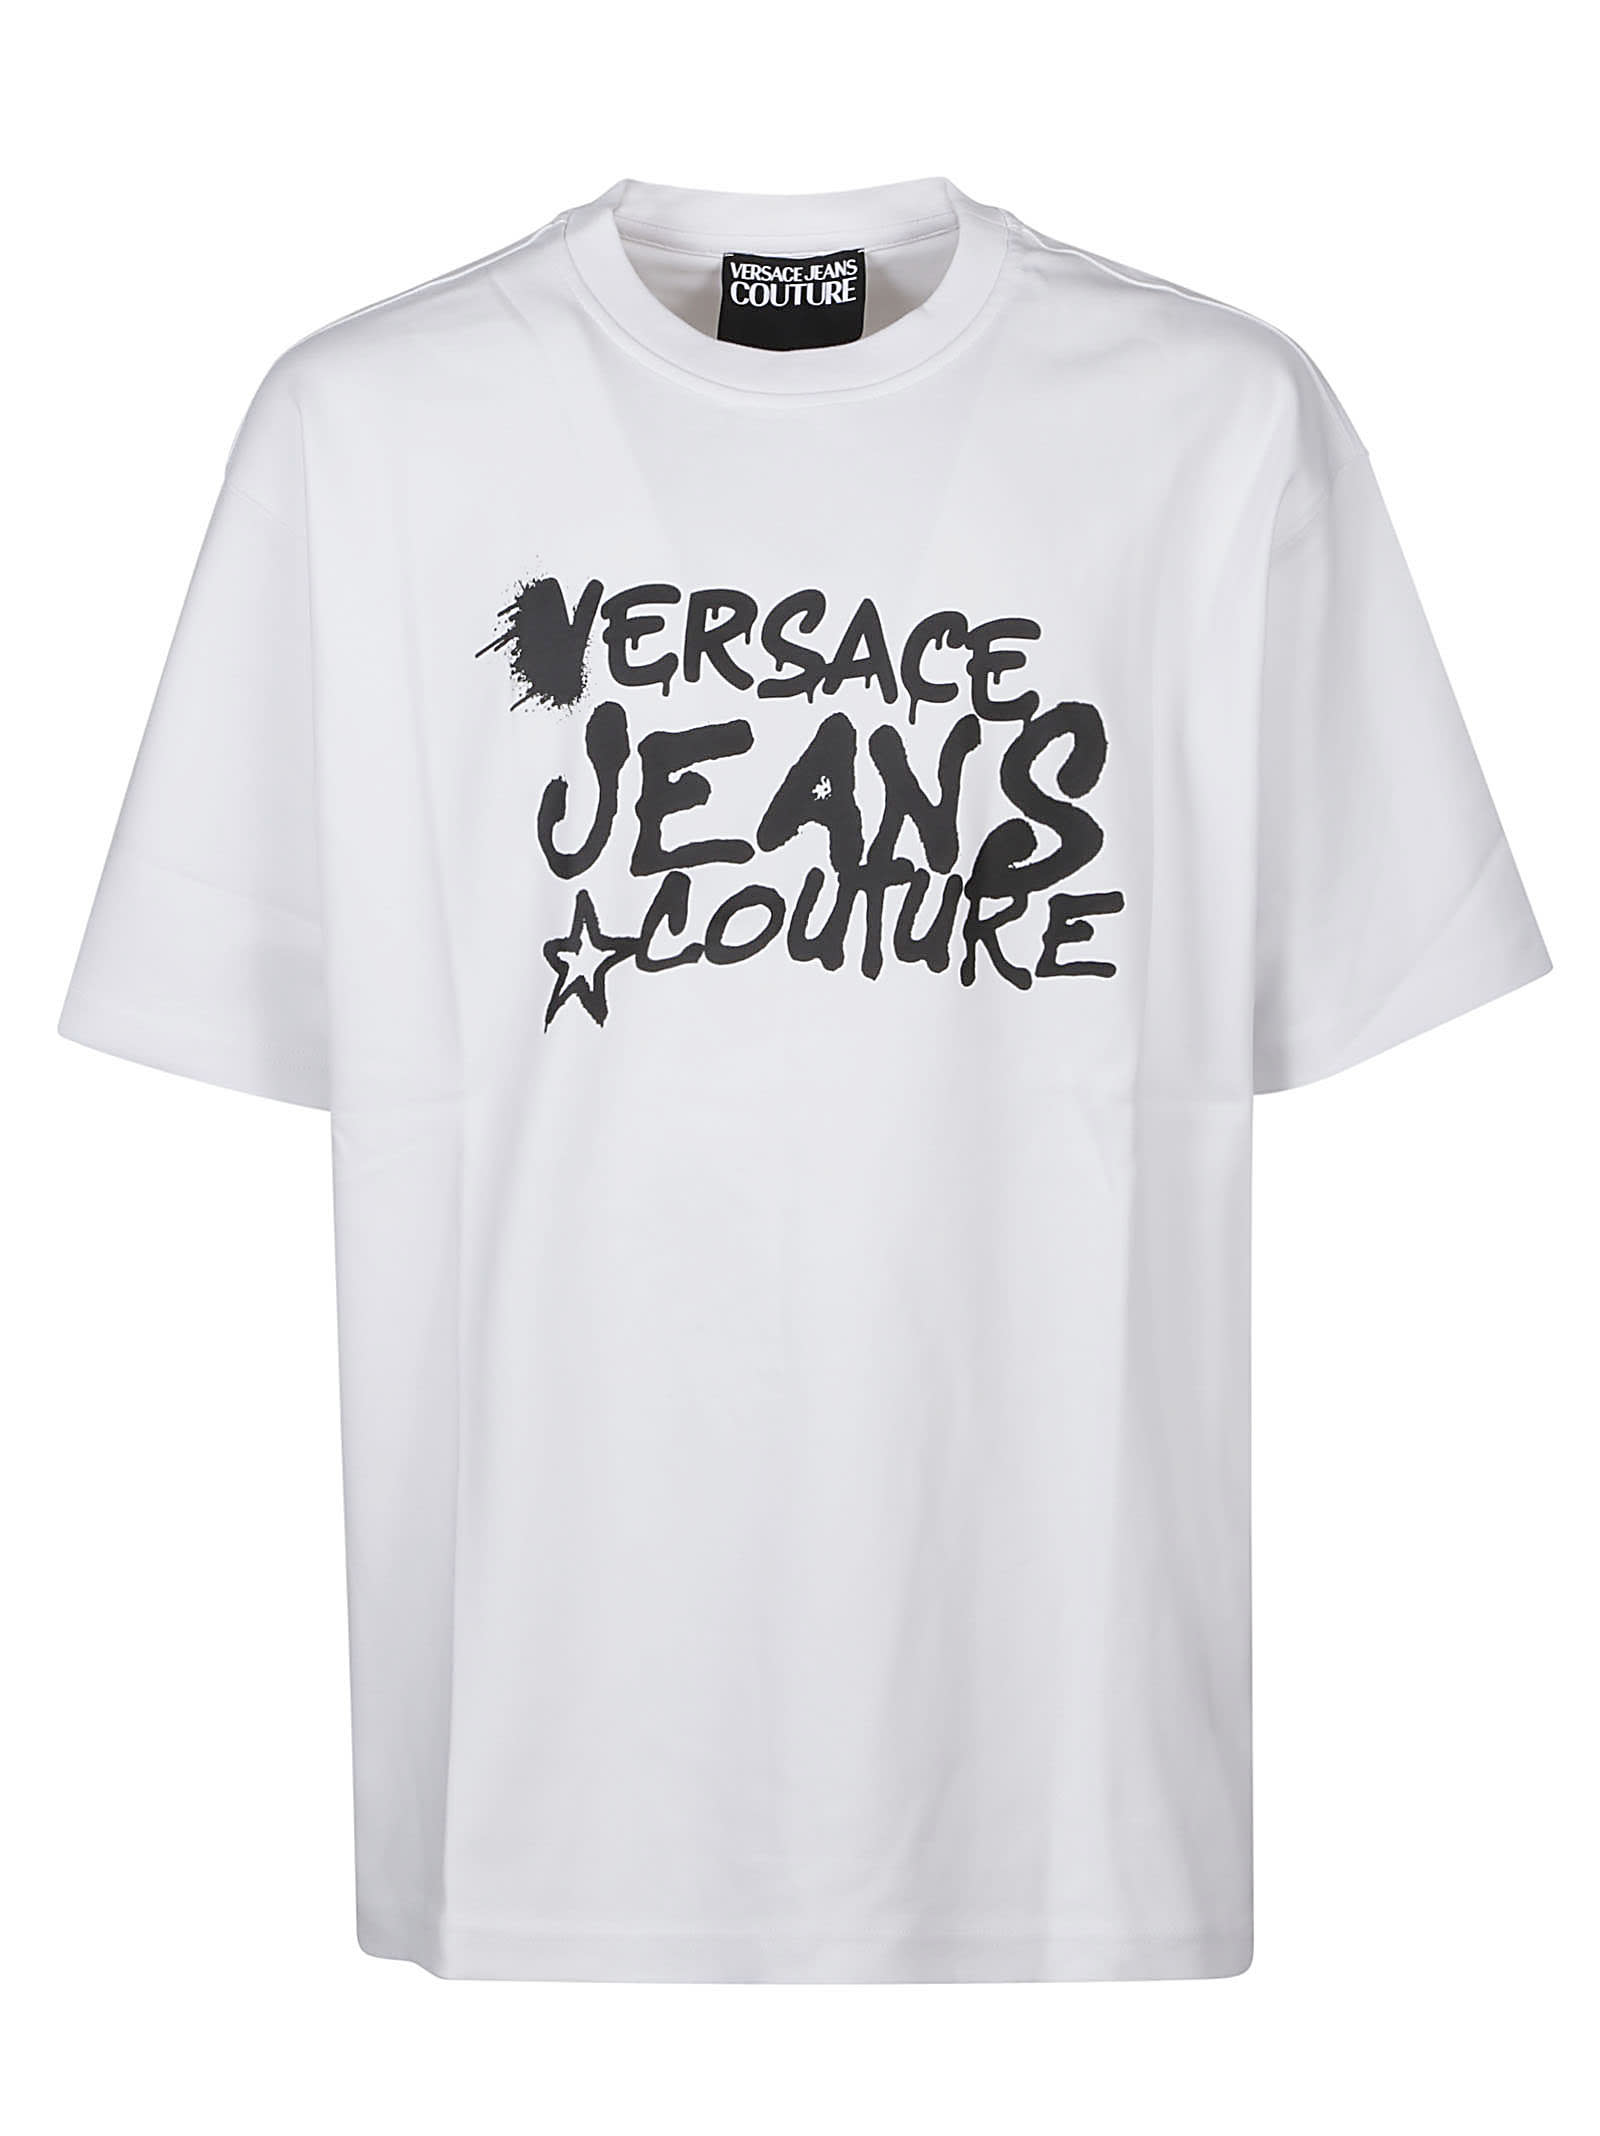 VERSACE JEANS COUTURE LOGO DRIPPING T-SHIRT